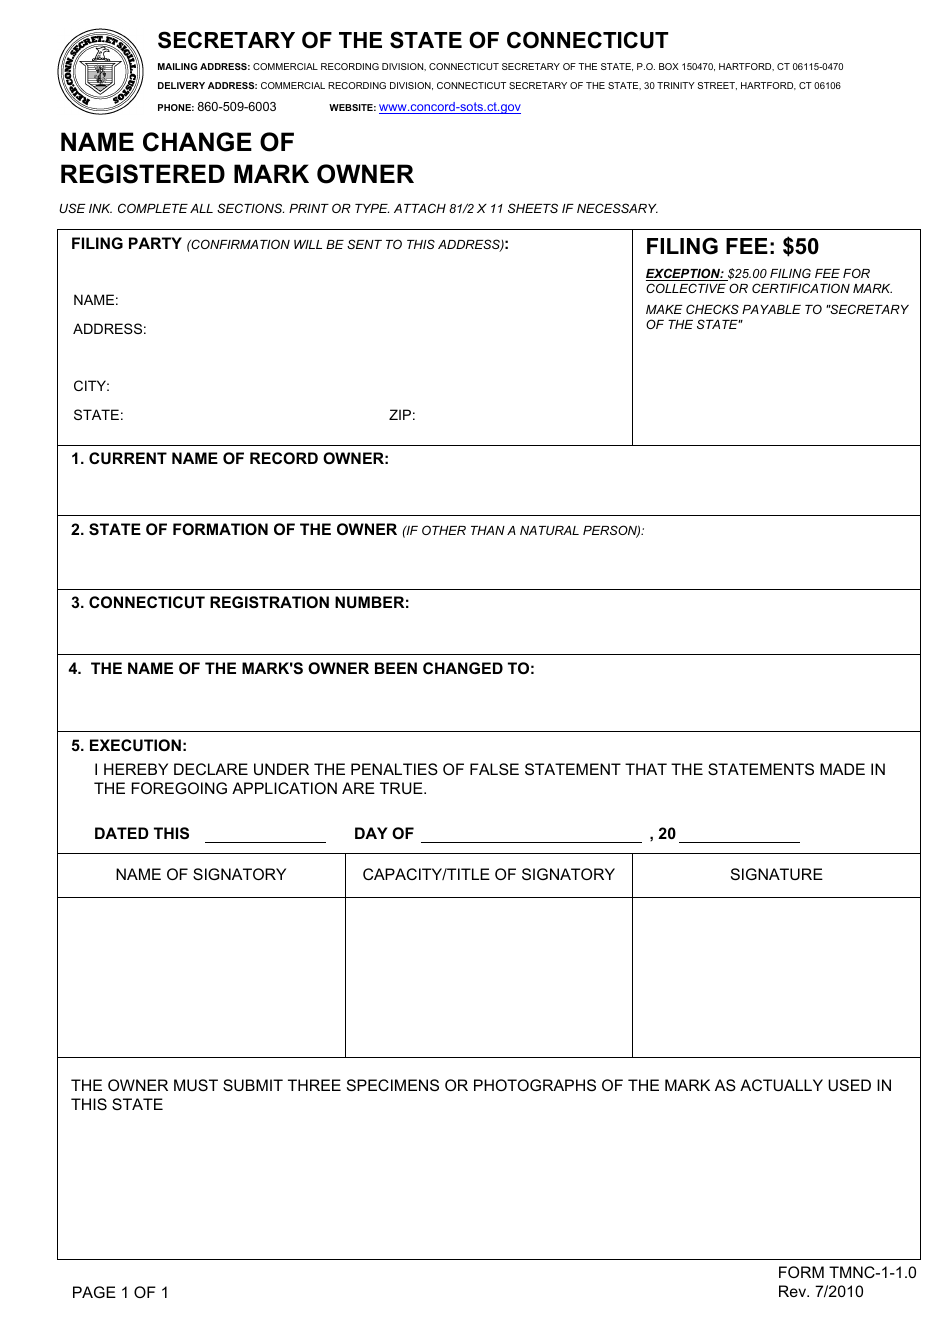 Form TMNC-1-1.0 Name Change of Registered Mark Owner - Connecticut, Page 1